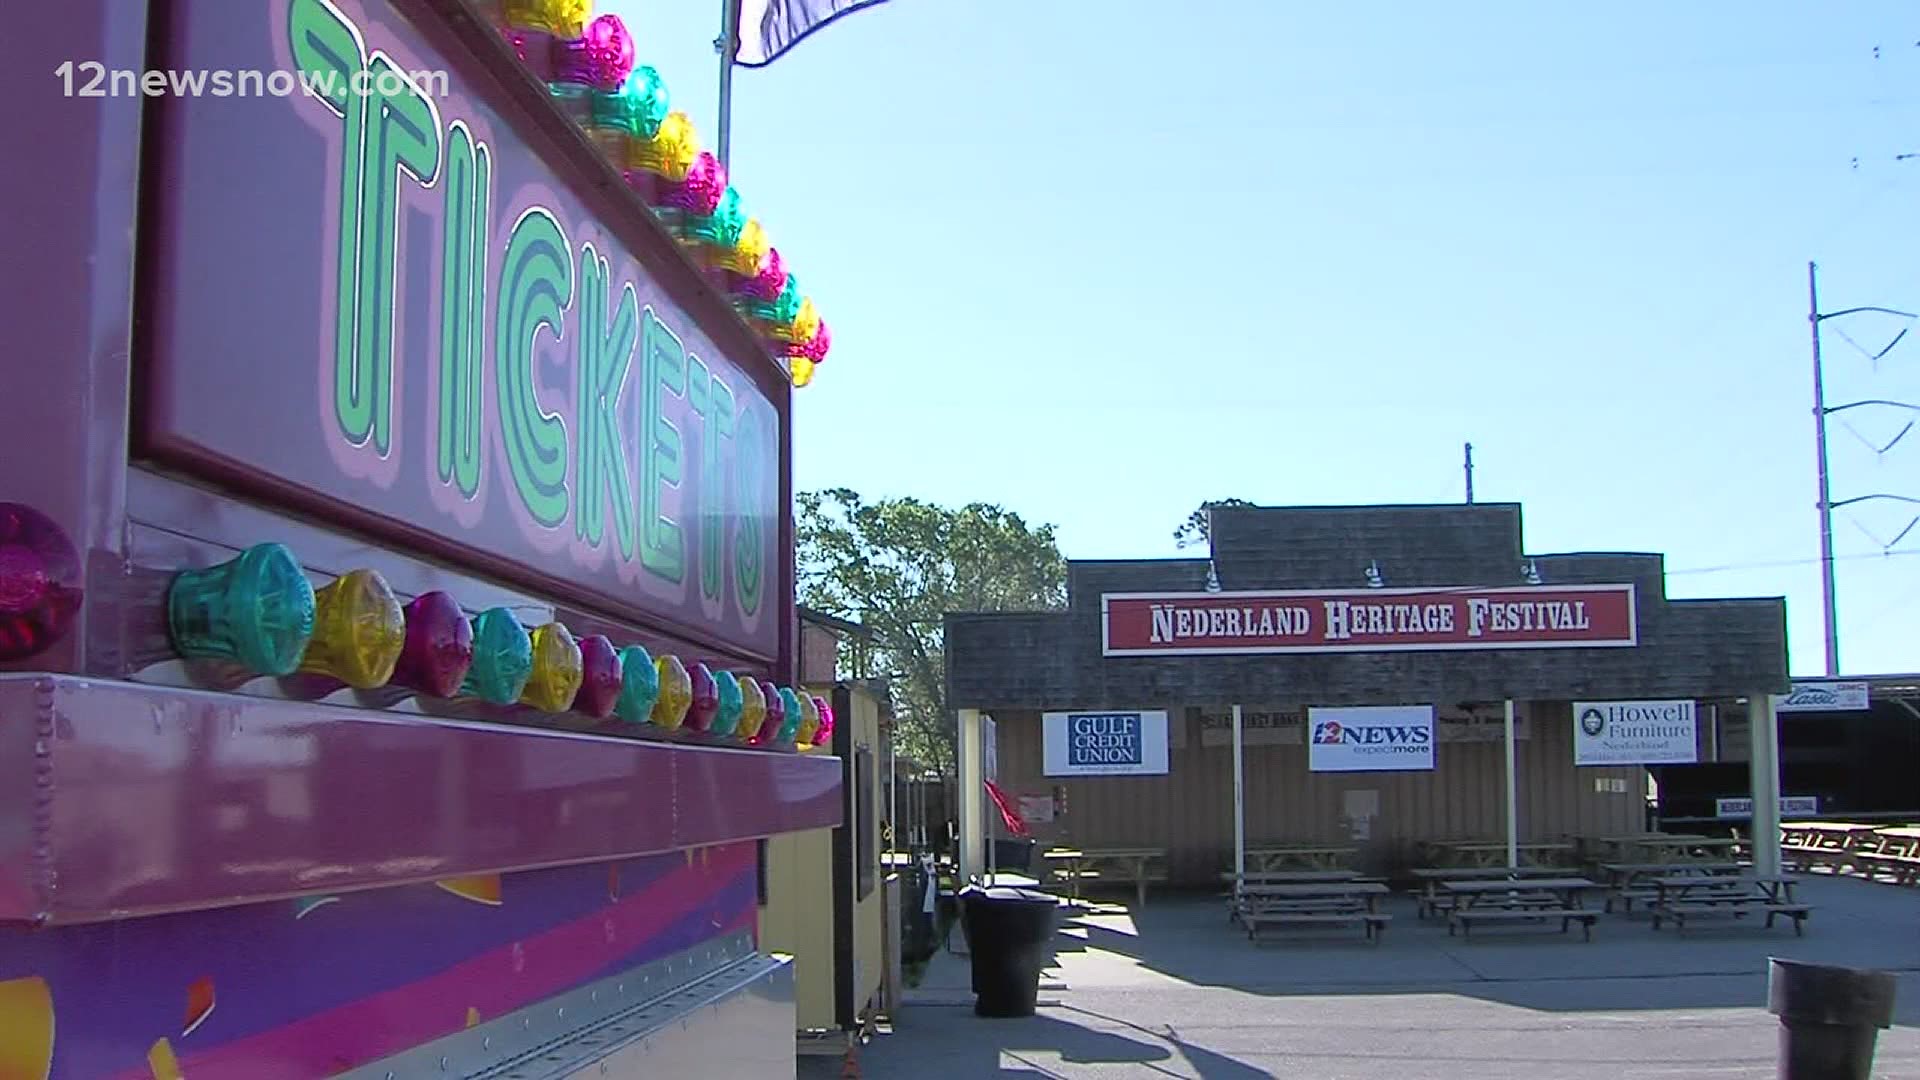 Organizers and small business owners are also feeling the financial impact of the cancelation.